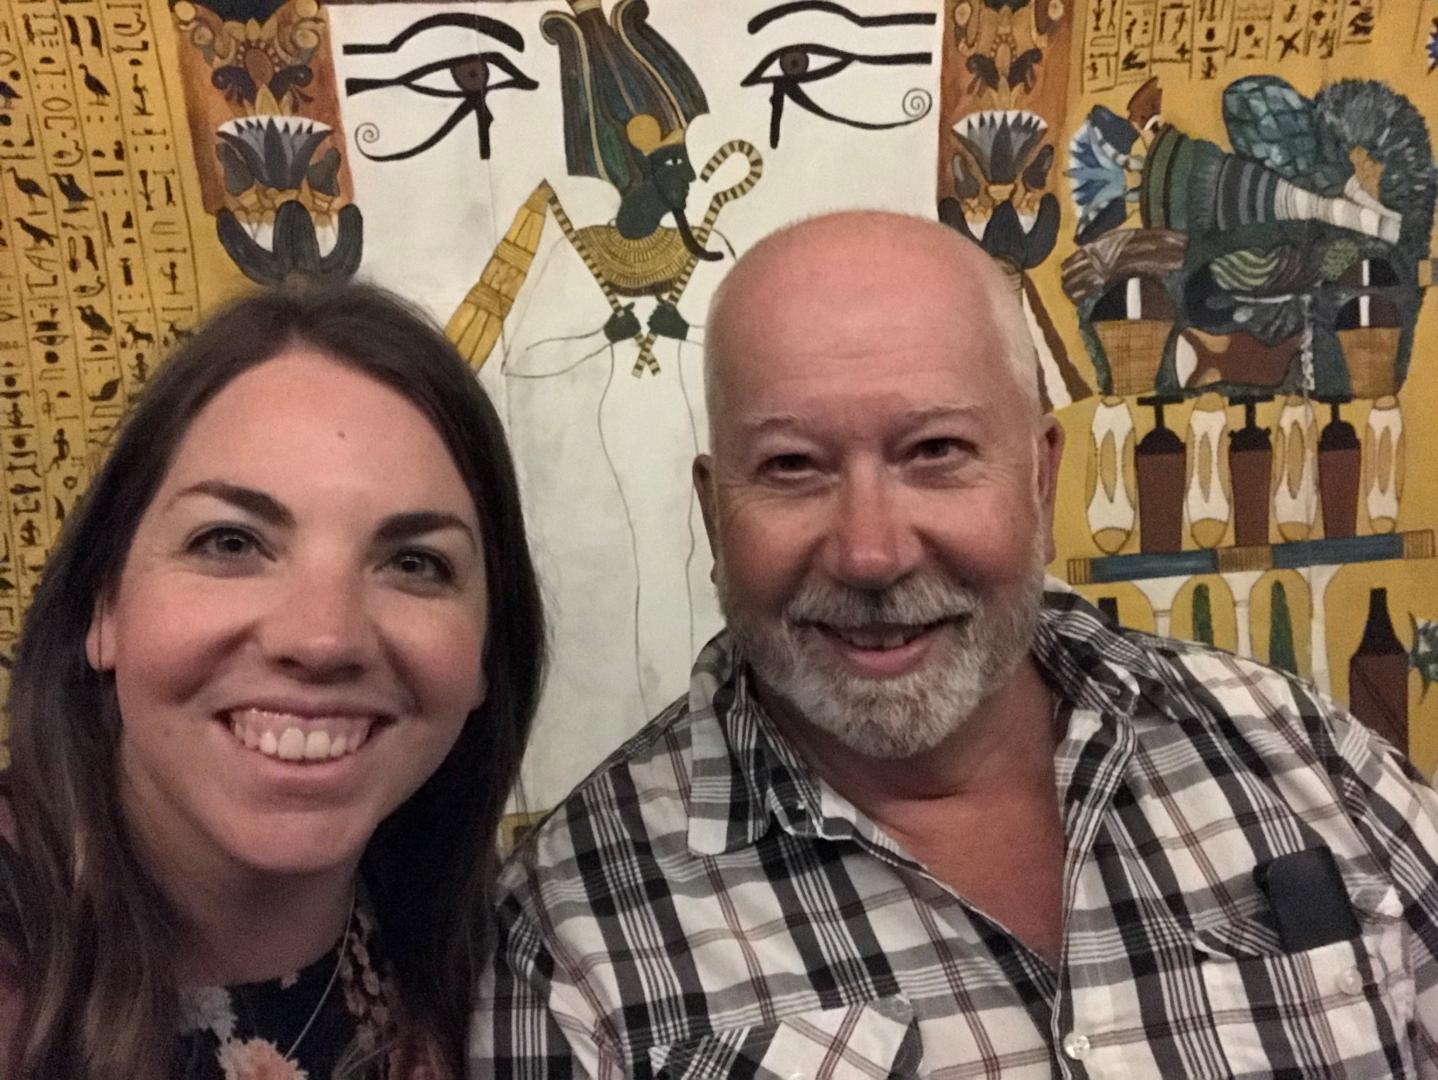 Pictured with my dad, Ray, in the Egypt: The Time of Pharaohs exhibition, June 20, 2018.